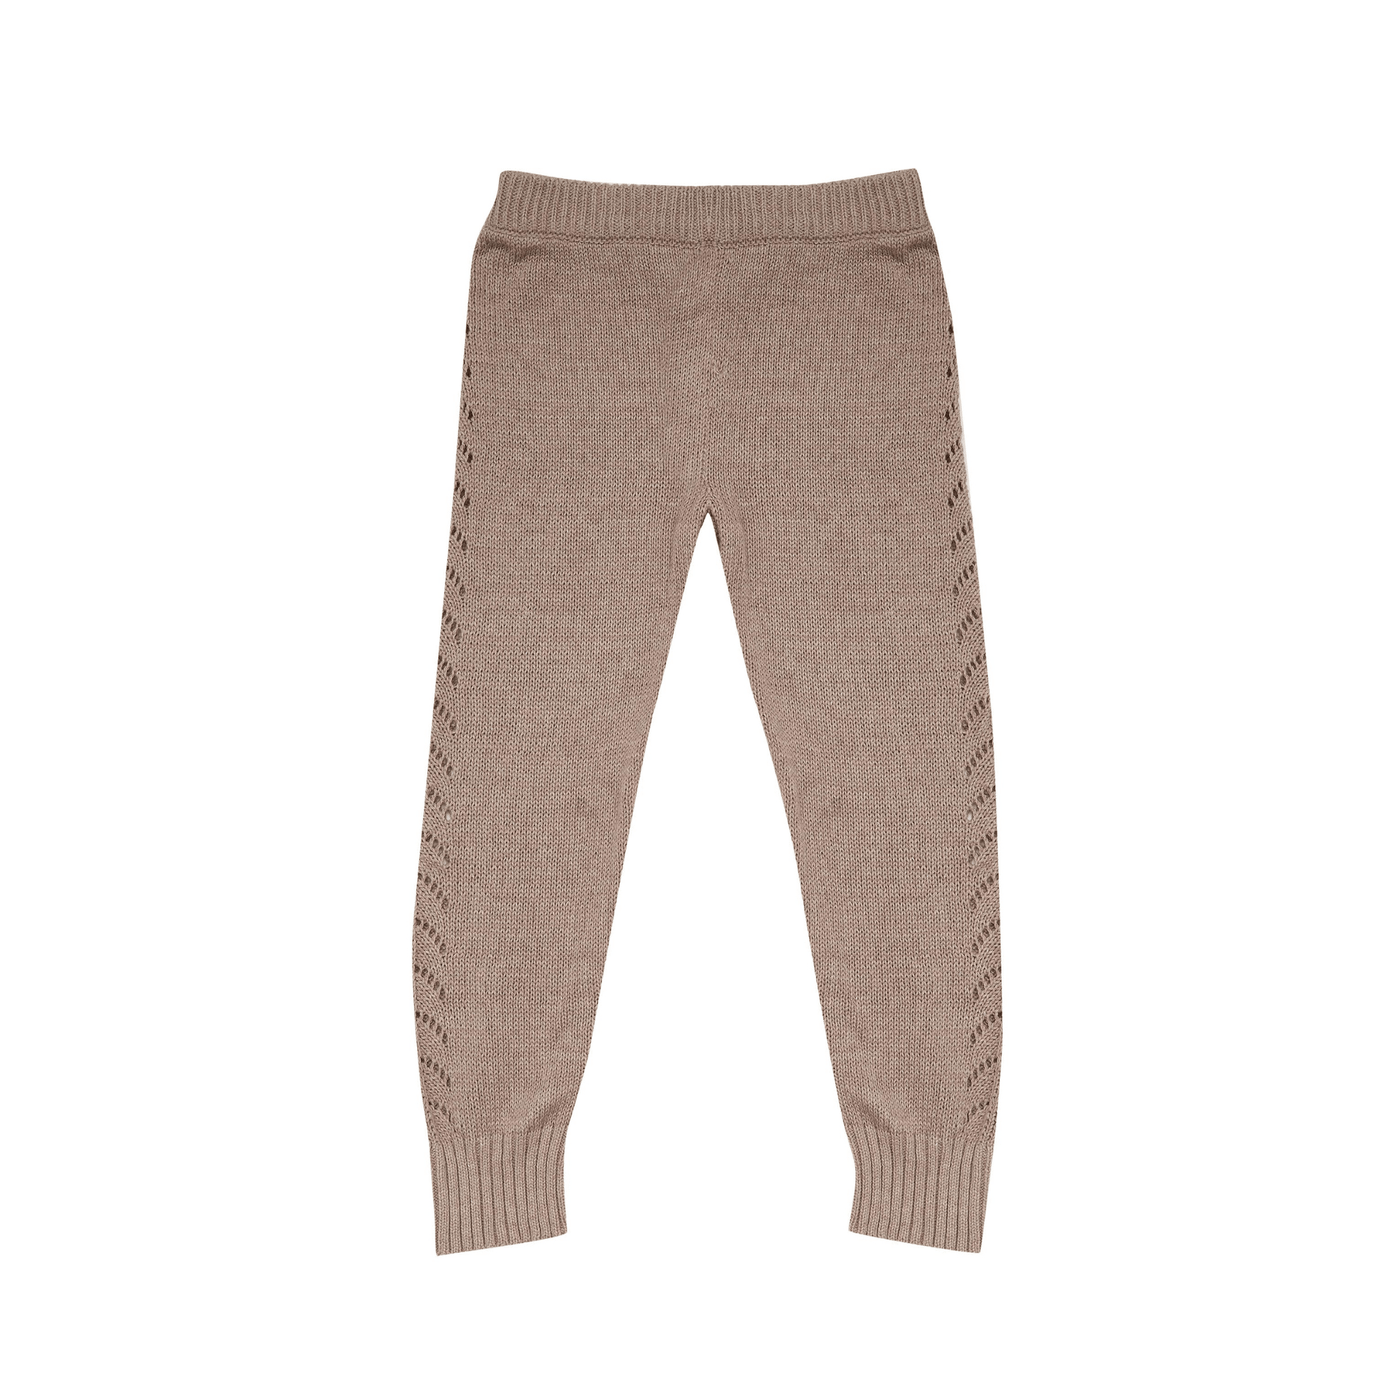 Bella and Lace Knitted Leggings Brown Sugar